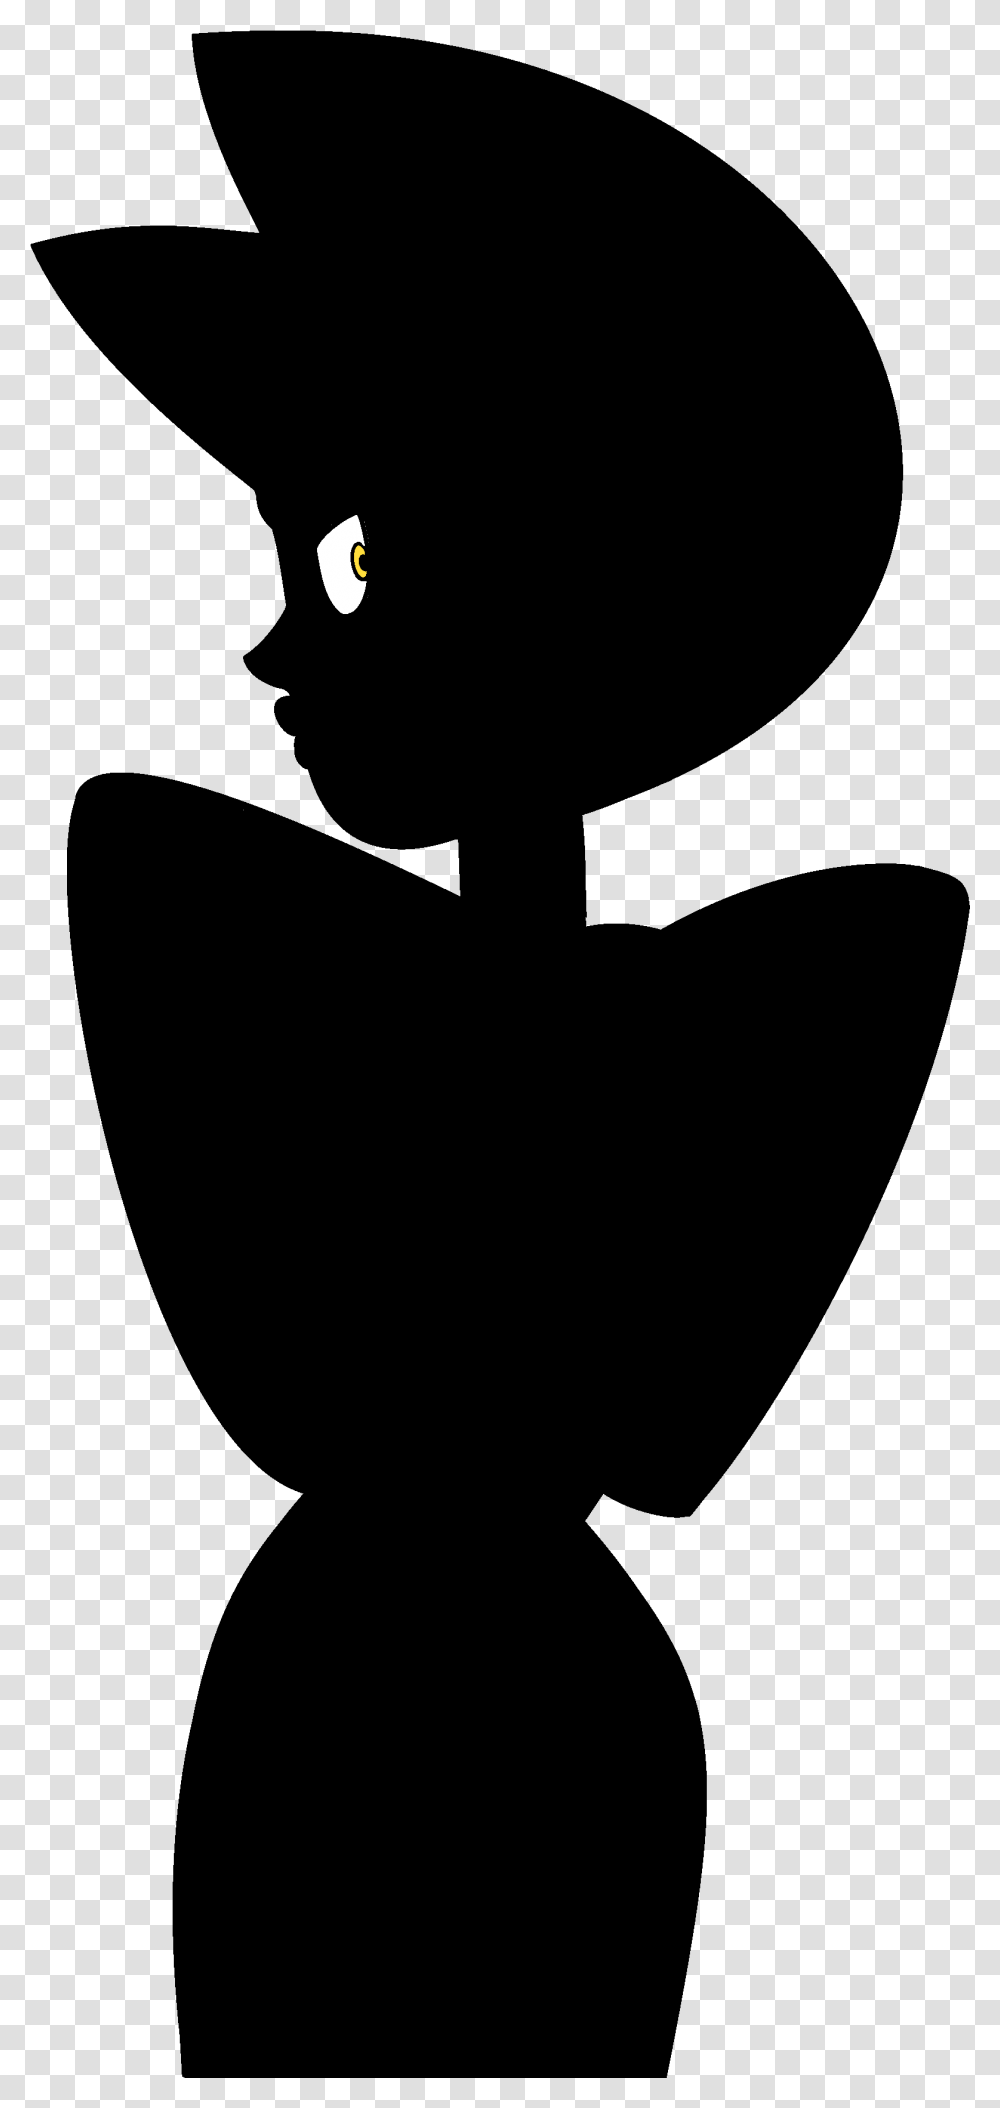 Diamond Silhouettes Steven Universe Download Steven Universe Sticker Diamonds, Outdoors, Nature, Moon, Outer Space Transparent Png